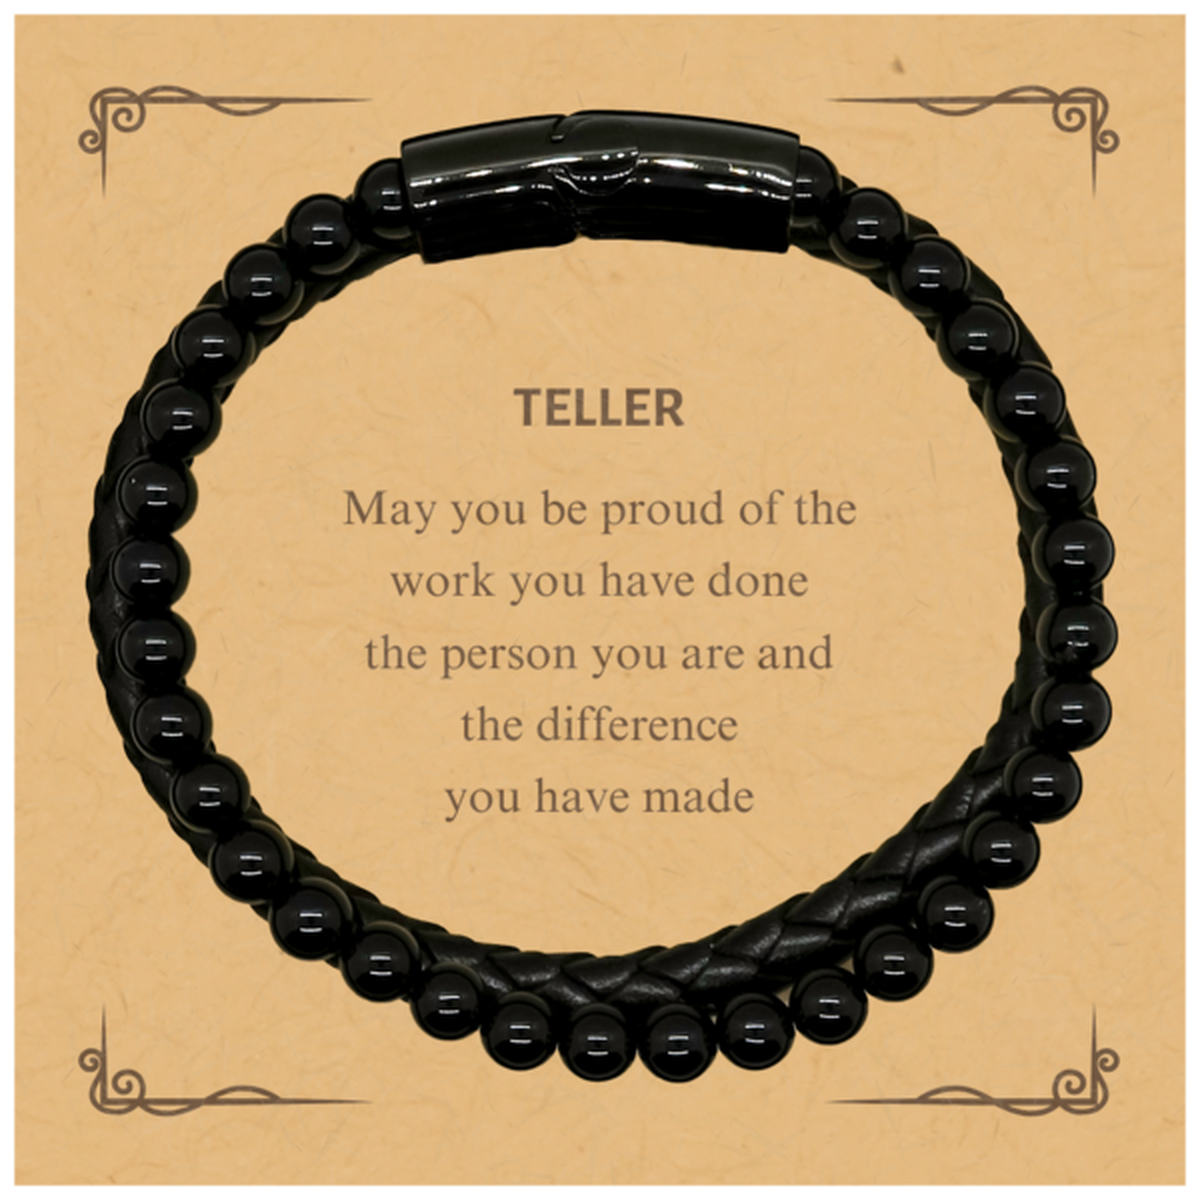 Teller May you be proud of the work you have done, Retirement Teller Stone Leather Bracelets for Colleague Appreciation Gifts Amazing for Teller